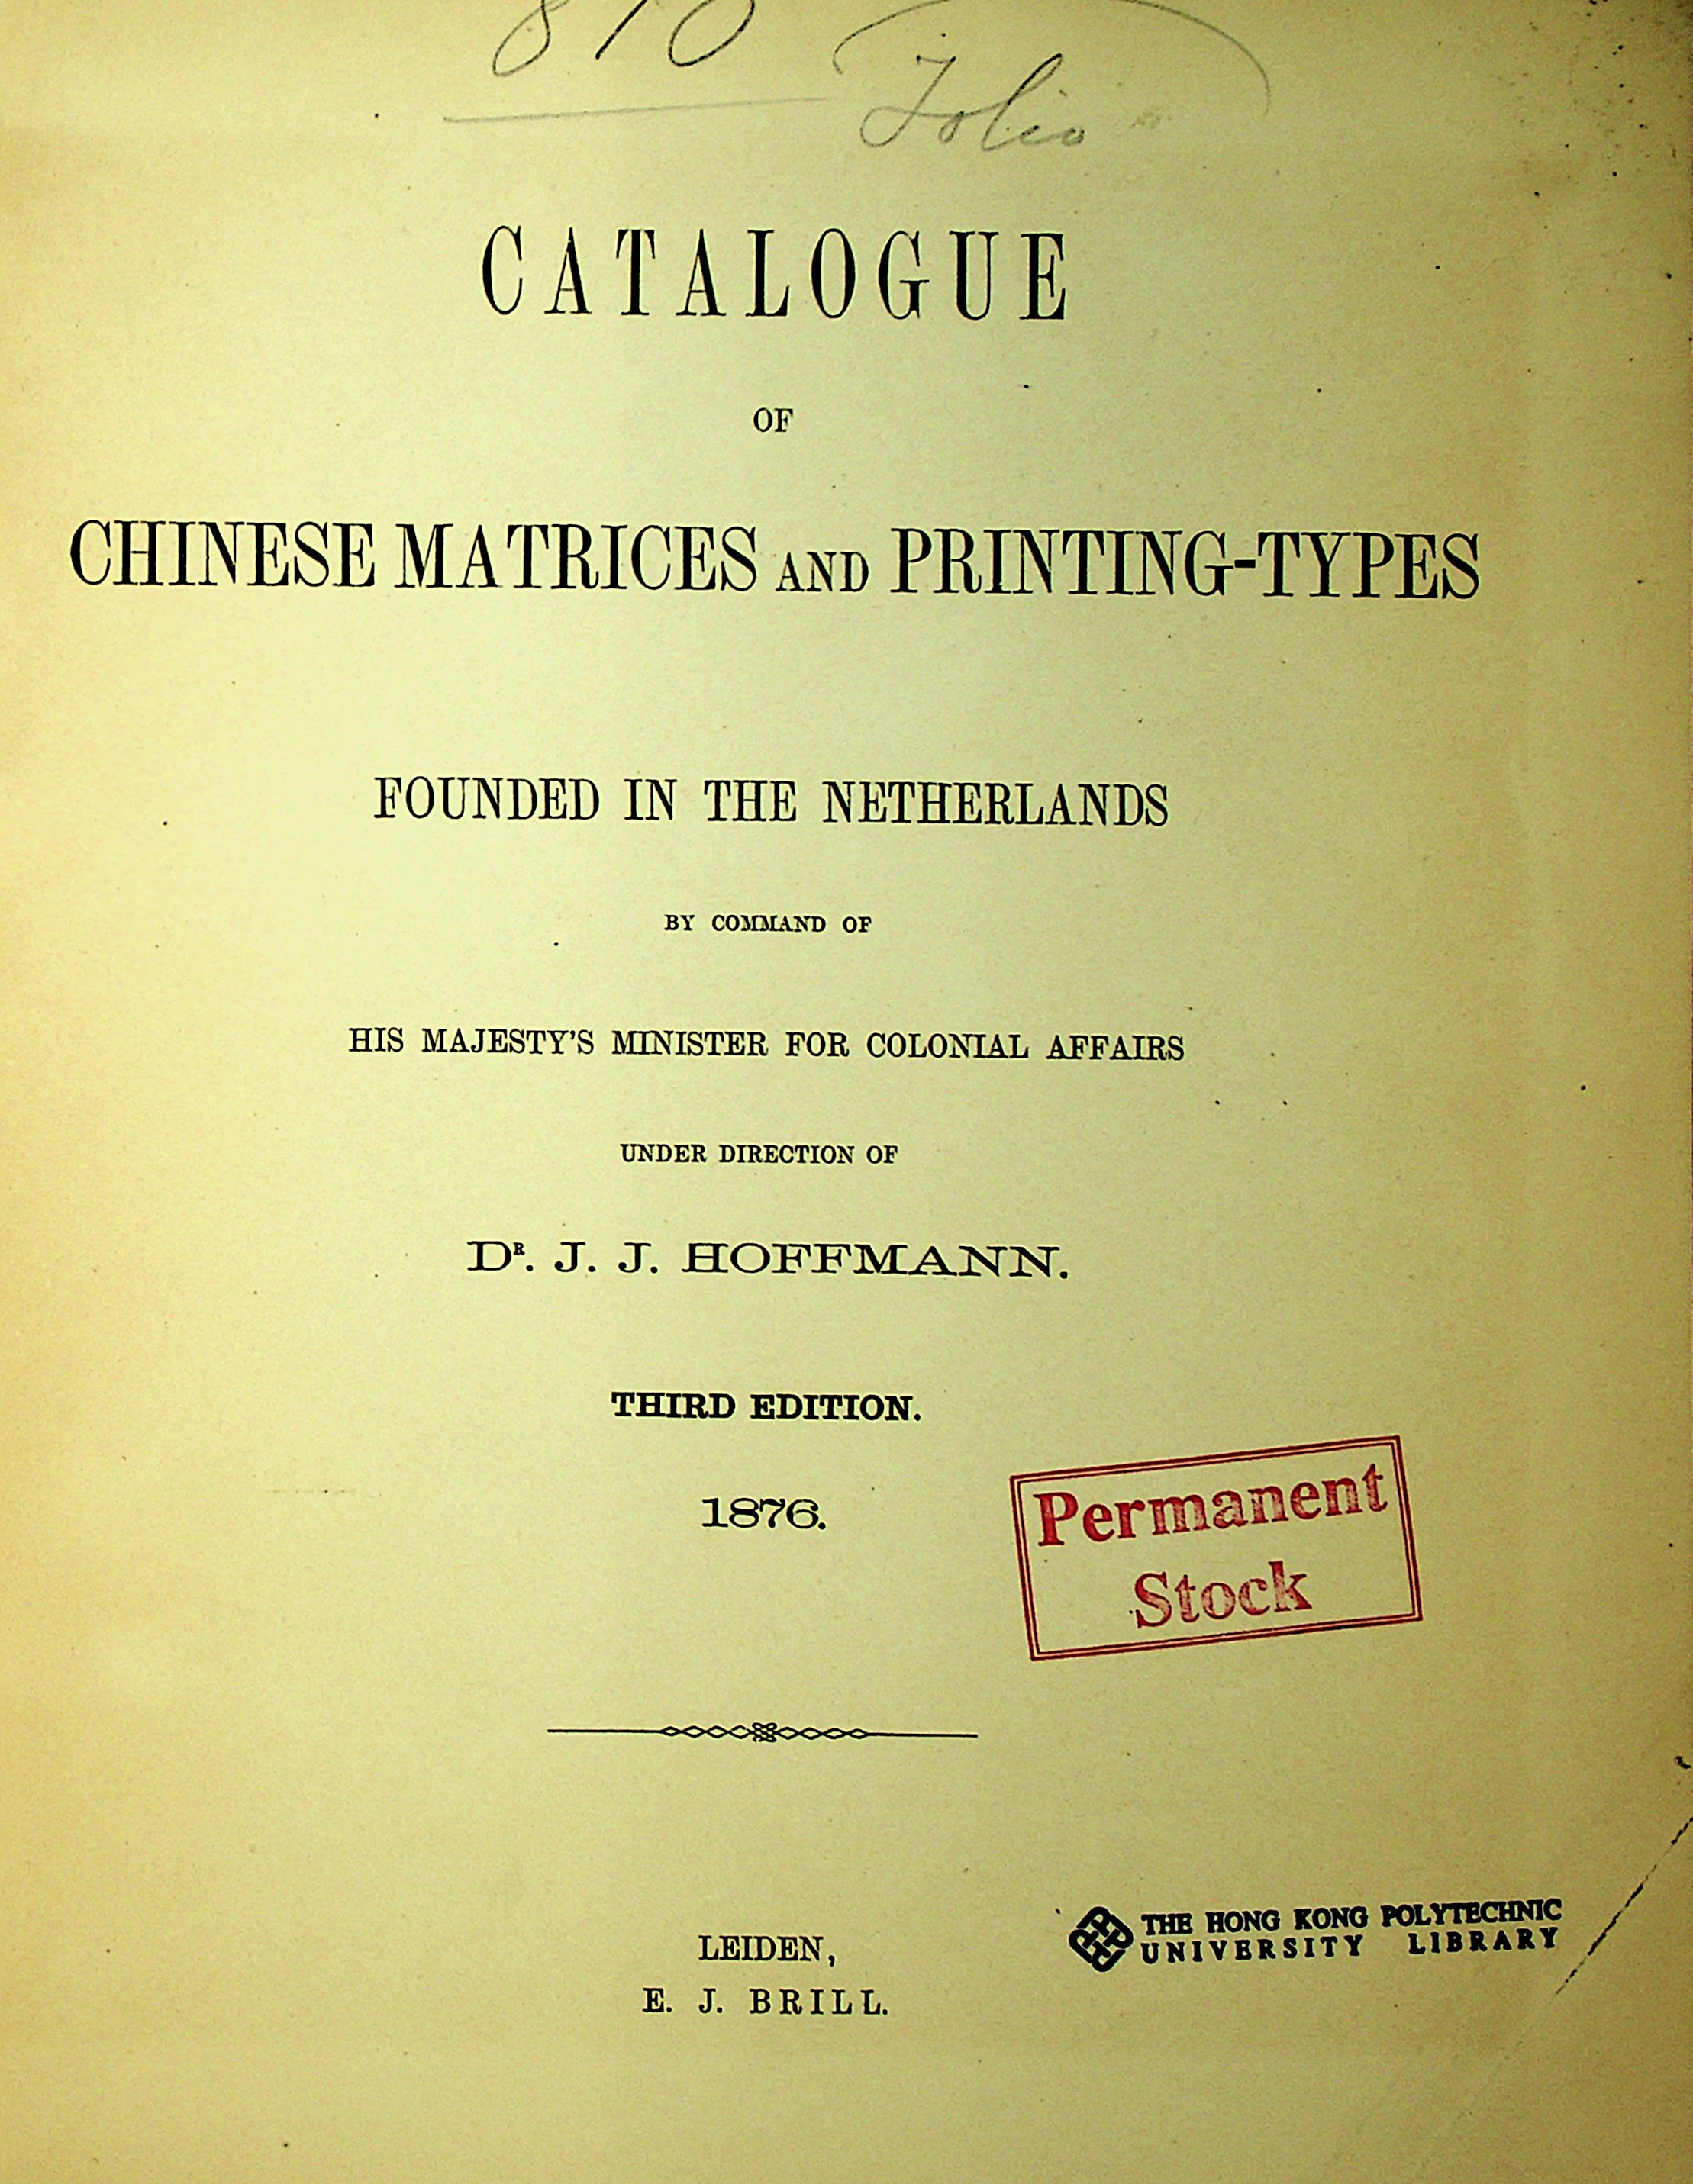 Catalogue of Chinese matrices and printing-types founded in the Netherlands